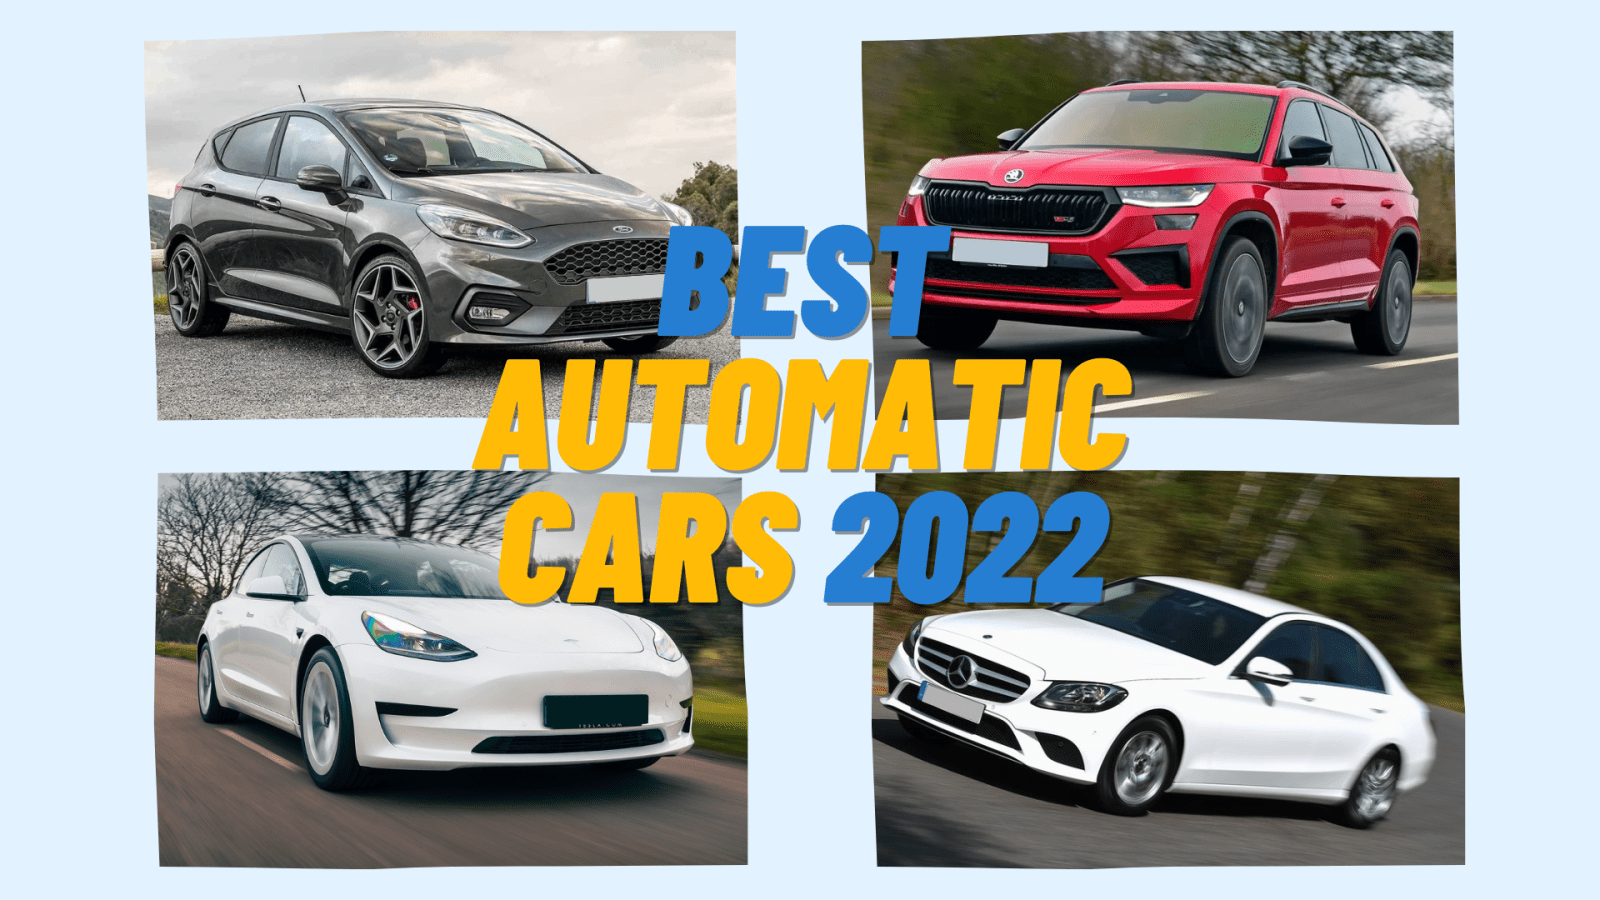 The Best Automatic Cars